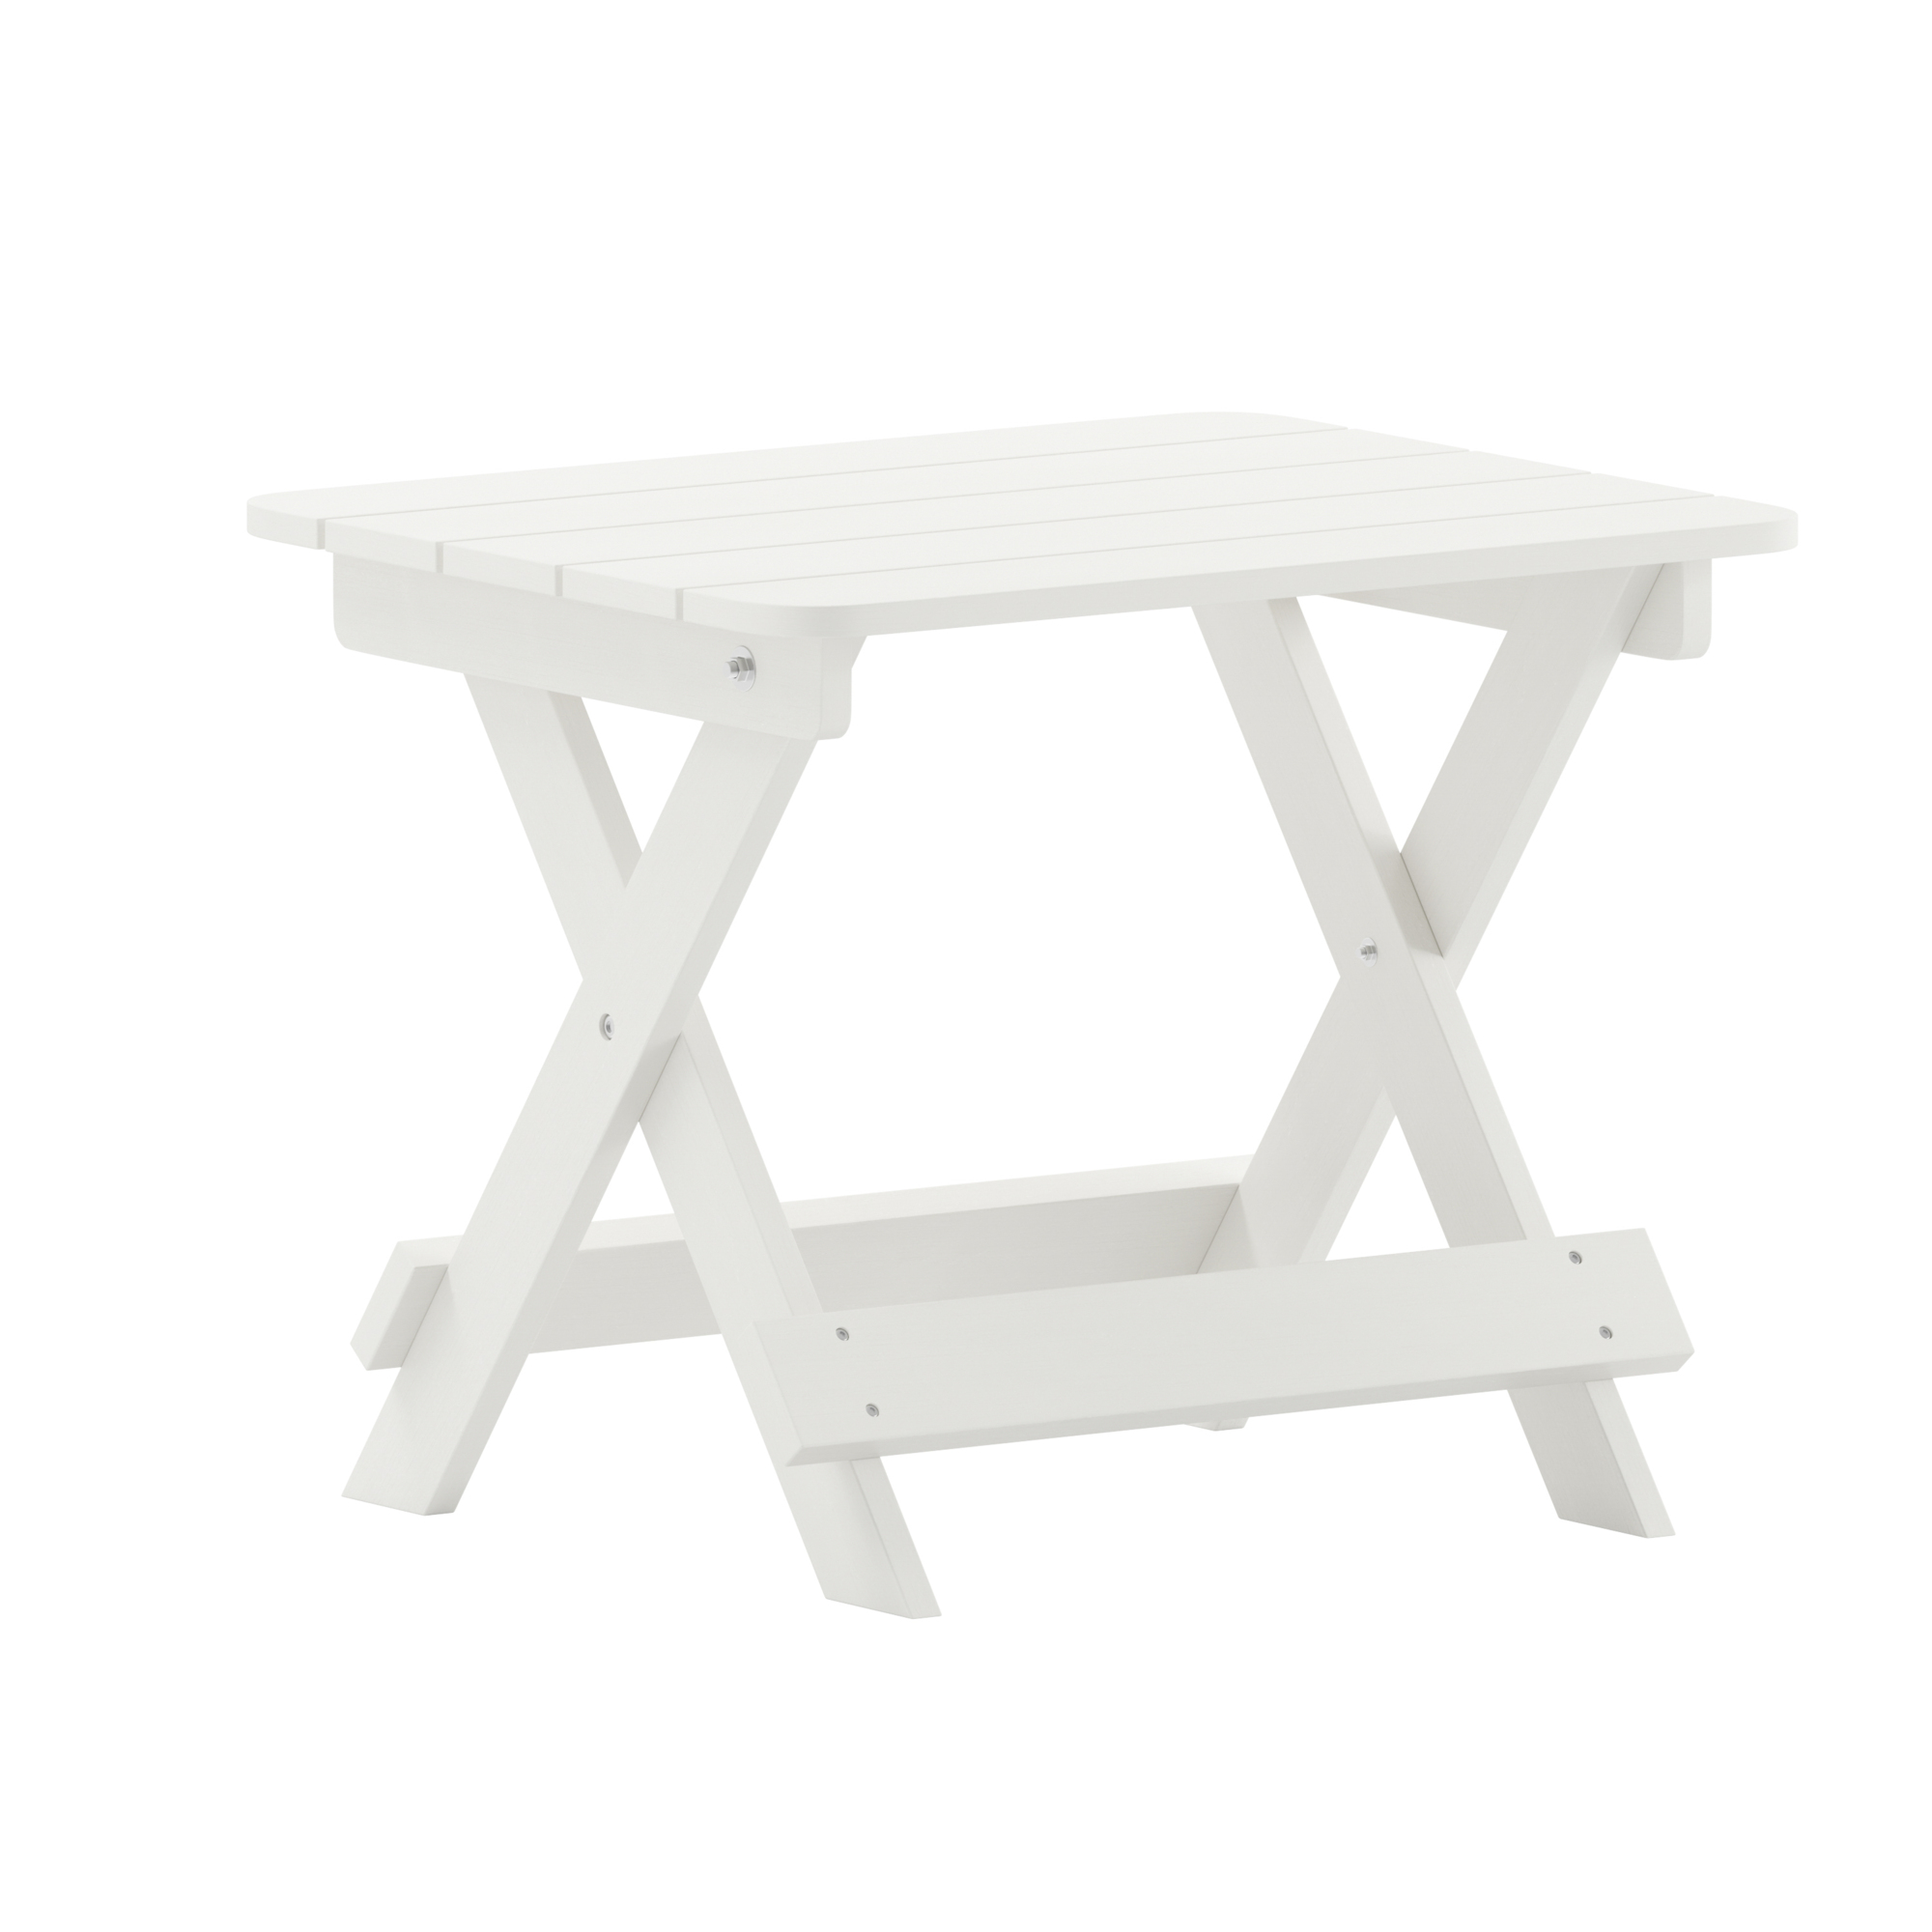 Flash Furniture, White Portable Folding Adirondack Side Table, Table Shape Rectangle, Primary Color White, Height 18 in, Model LEHMP2012162HWT